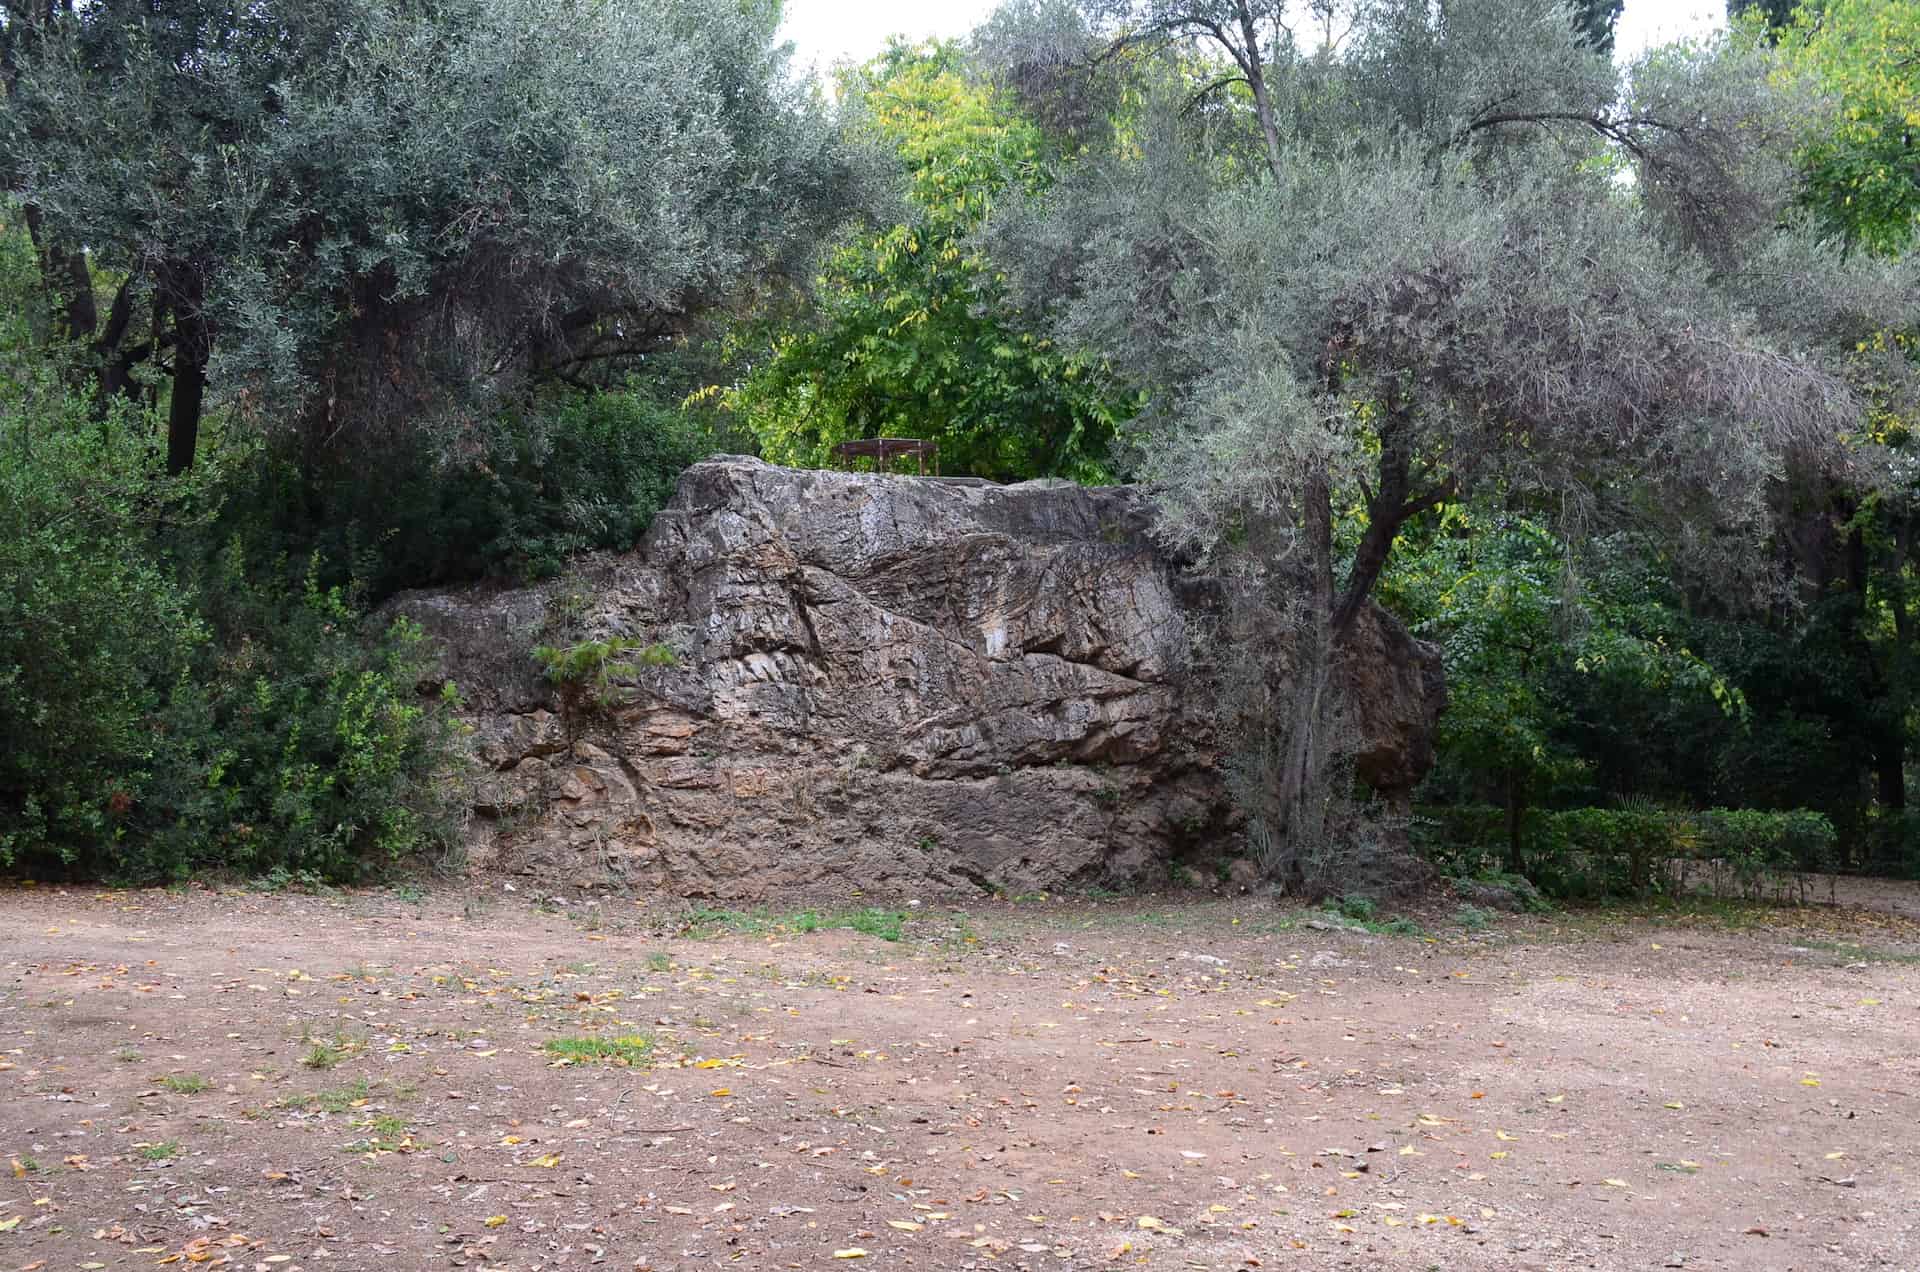 Queen Amalia's Rock at the National Garden in Athens, Greece